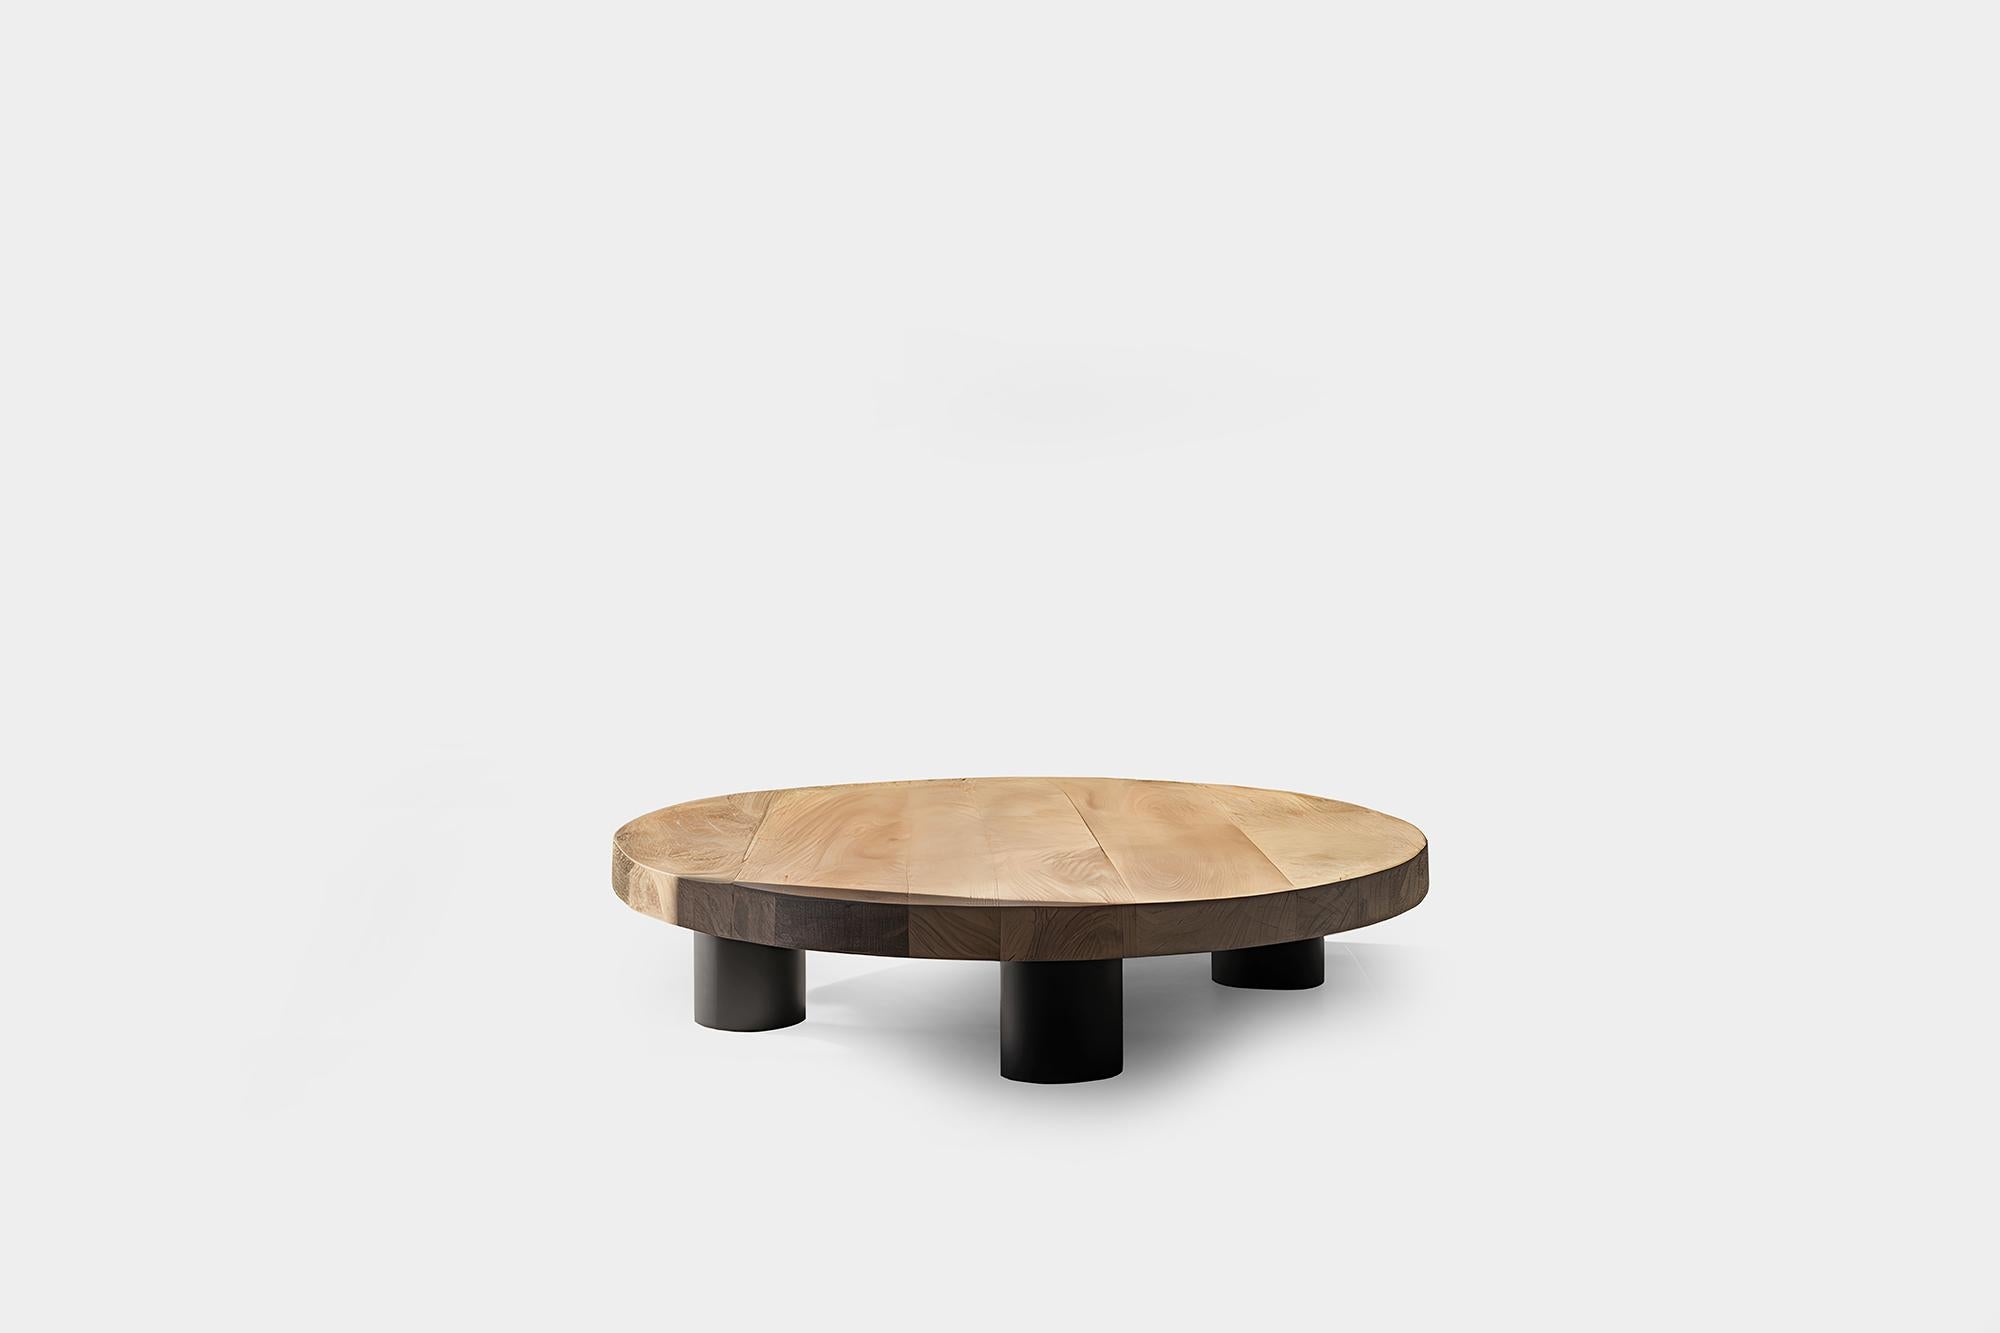 Bicolor Rectangular Coffee Table - Contrast Fundamenta 30 by NONO


Sculptural coffee table made of solid wood with a natural water-based or black tinted finish. Due to the nature of the production process, each piece may vary in grain, texture,